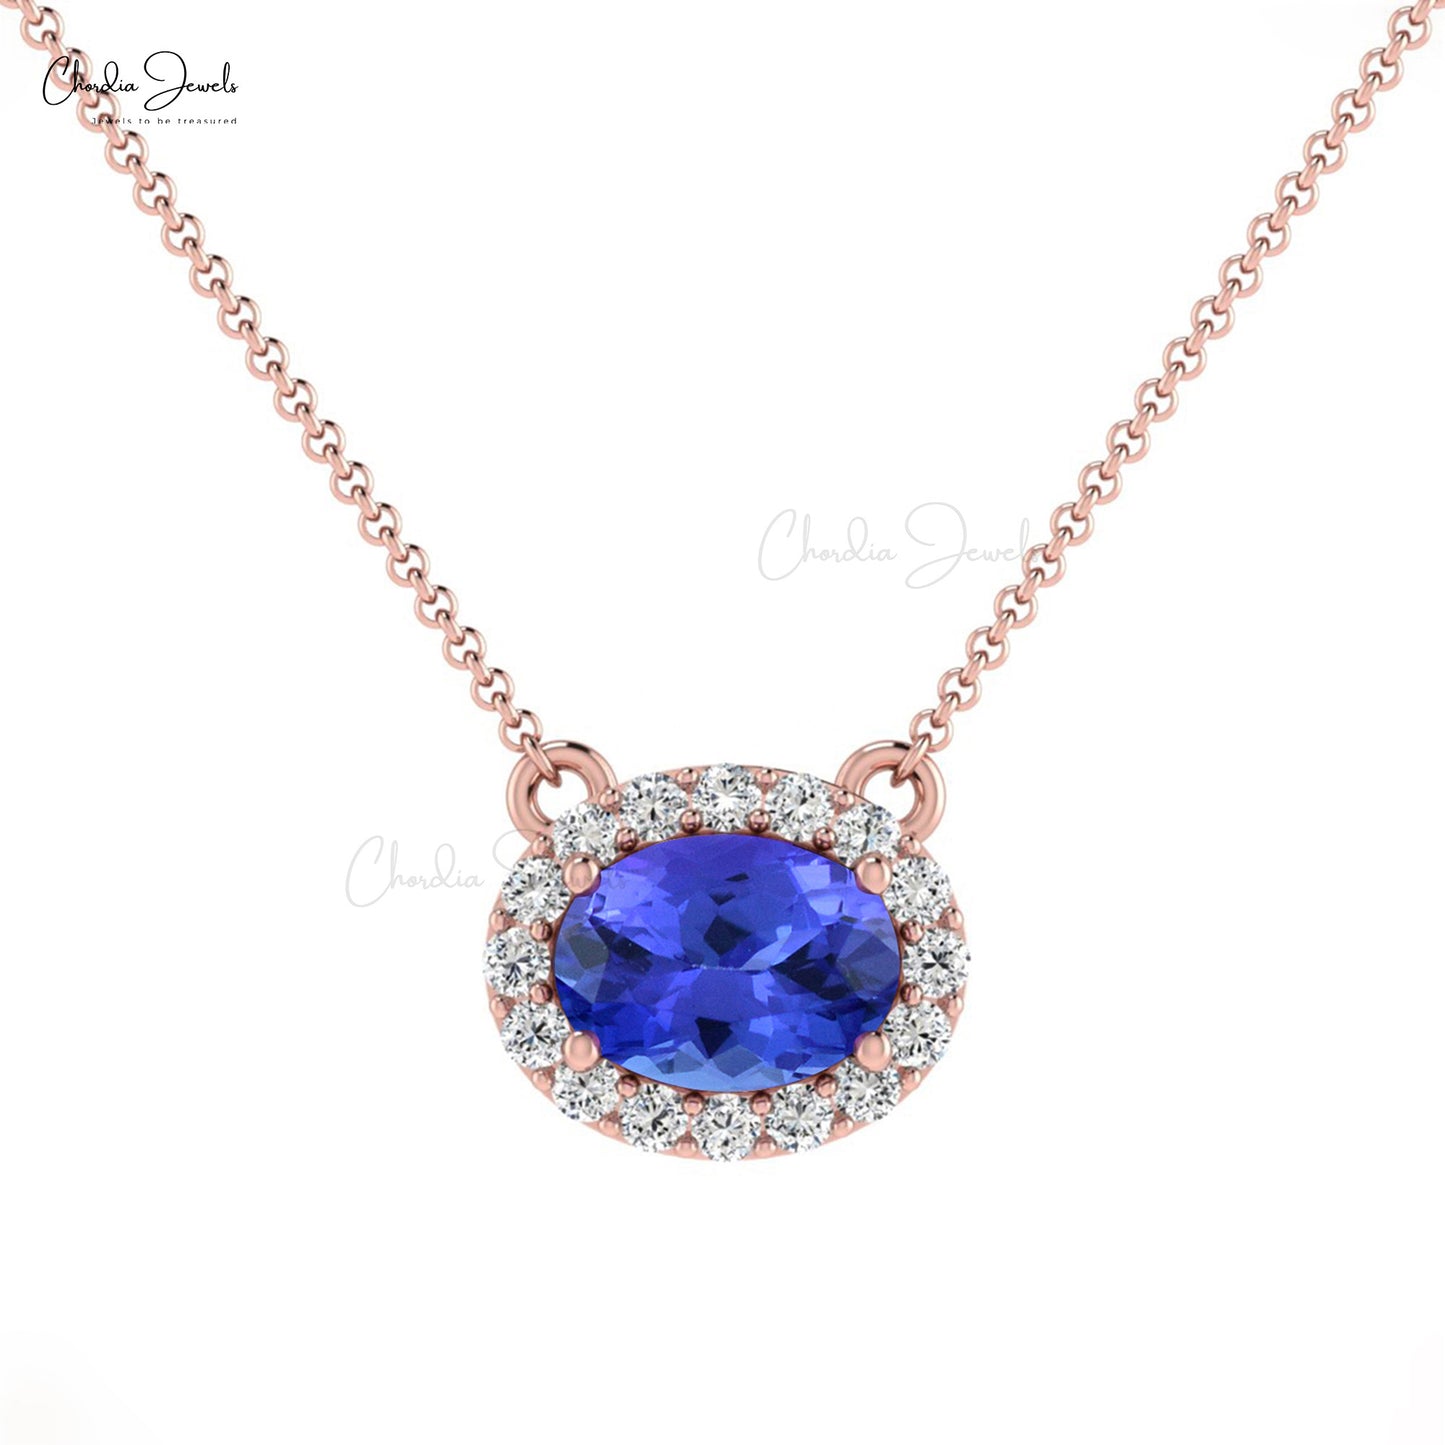 Natural Tanzanite 7x5mm Oval Cut Halo Necklace For Women 14k Solid Gold April Birthstone White Diamond Wedding Hallmarked Jewelry